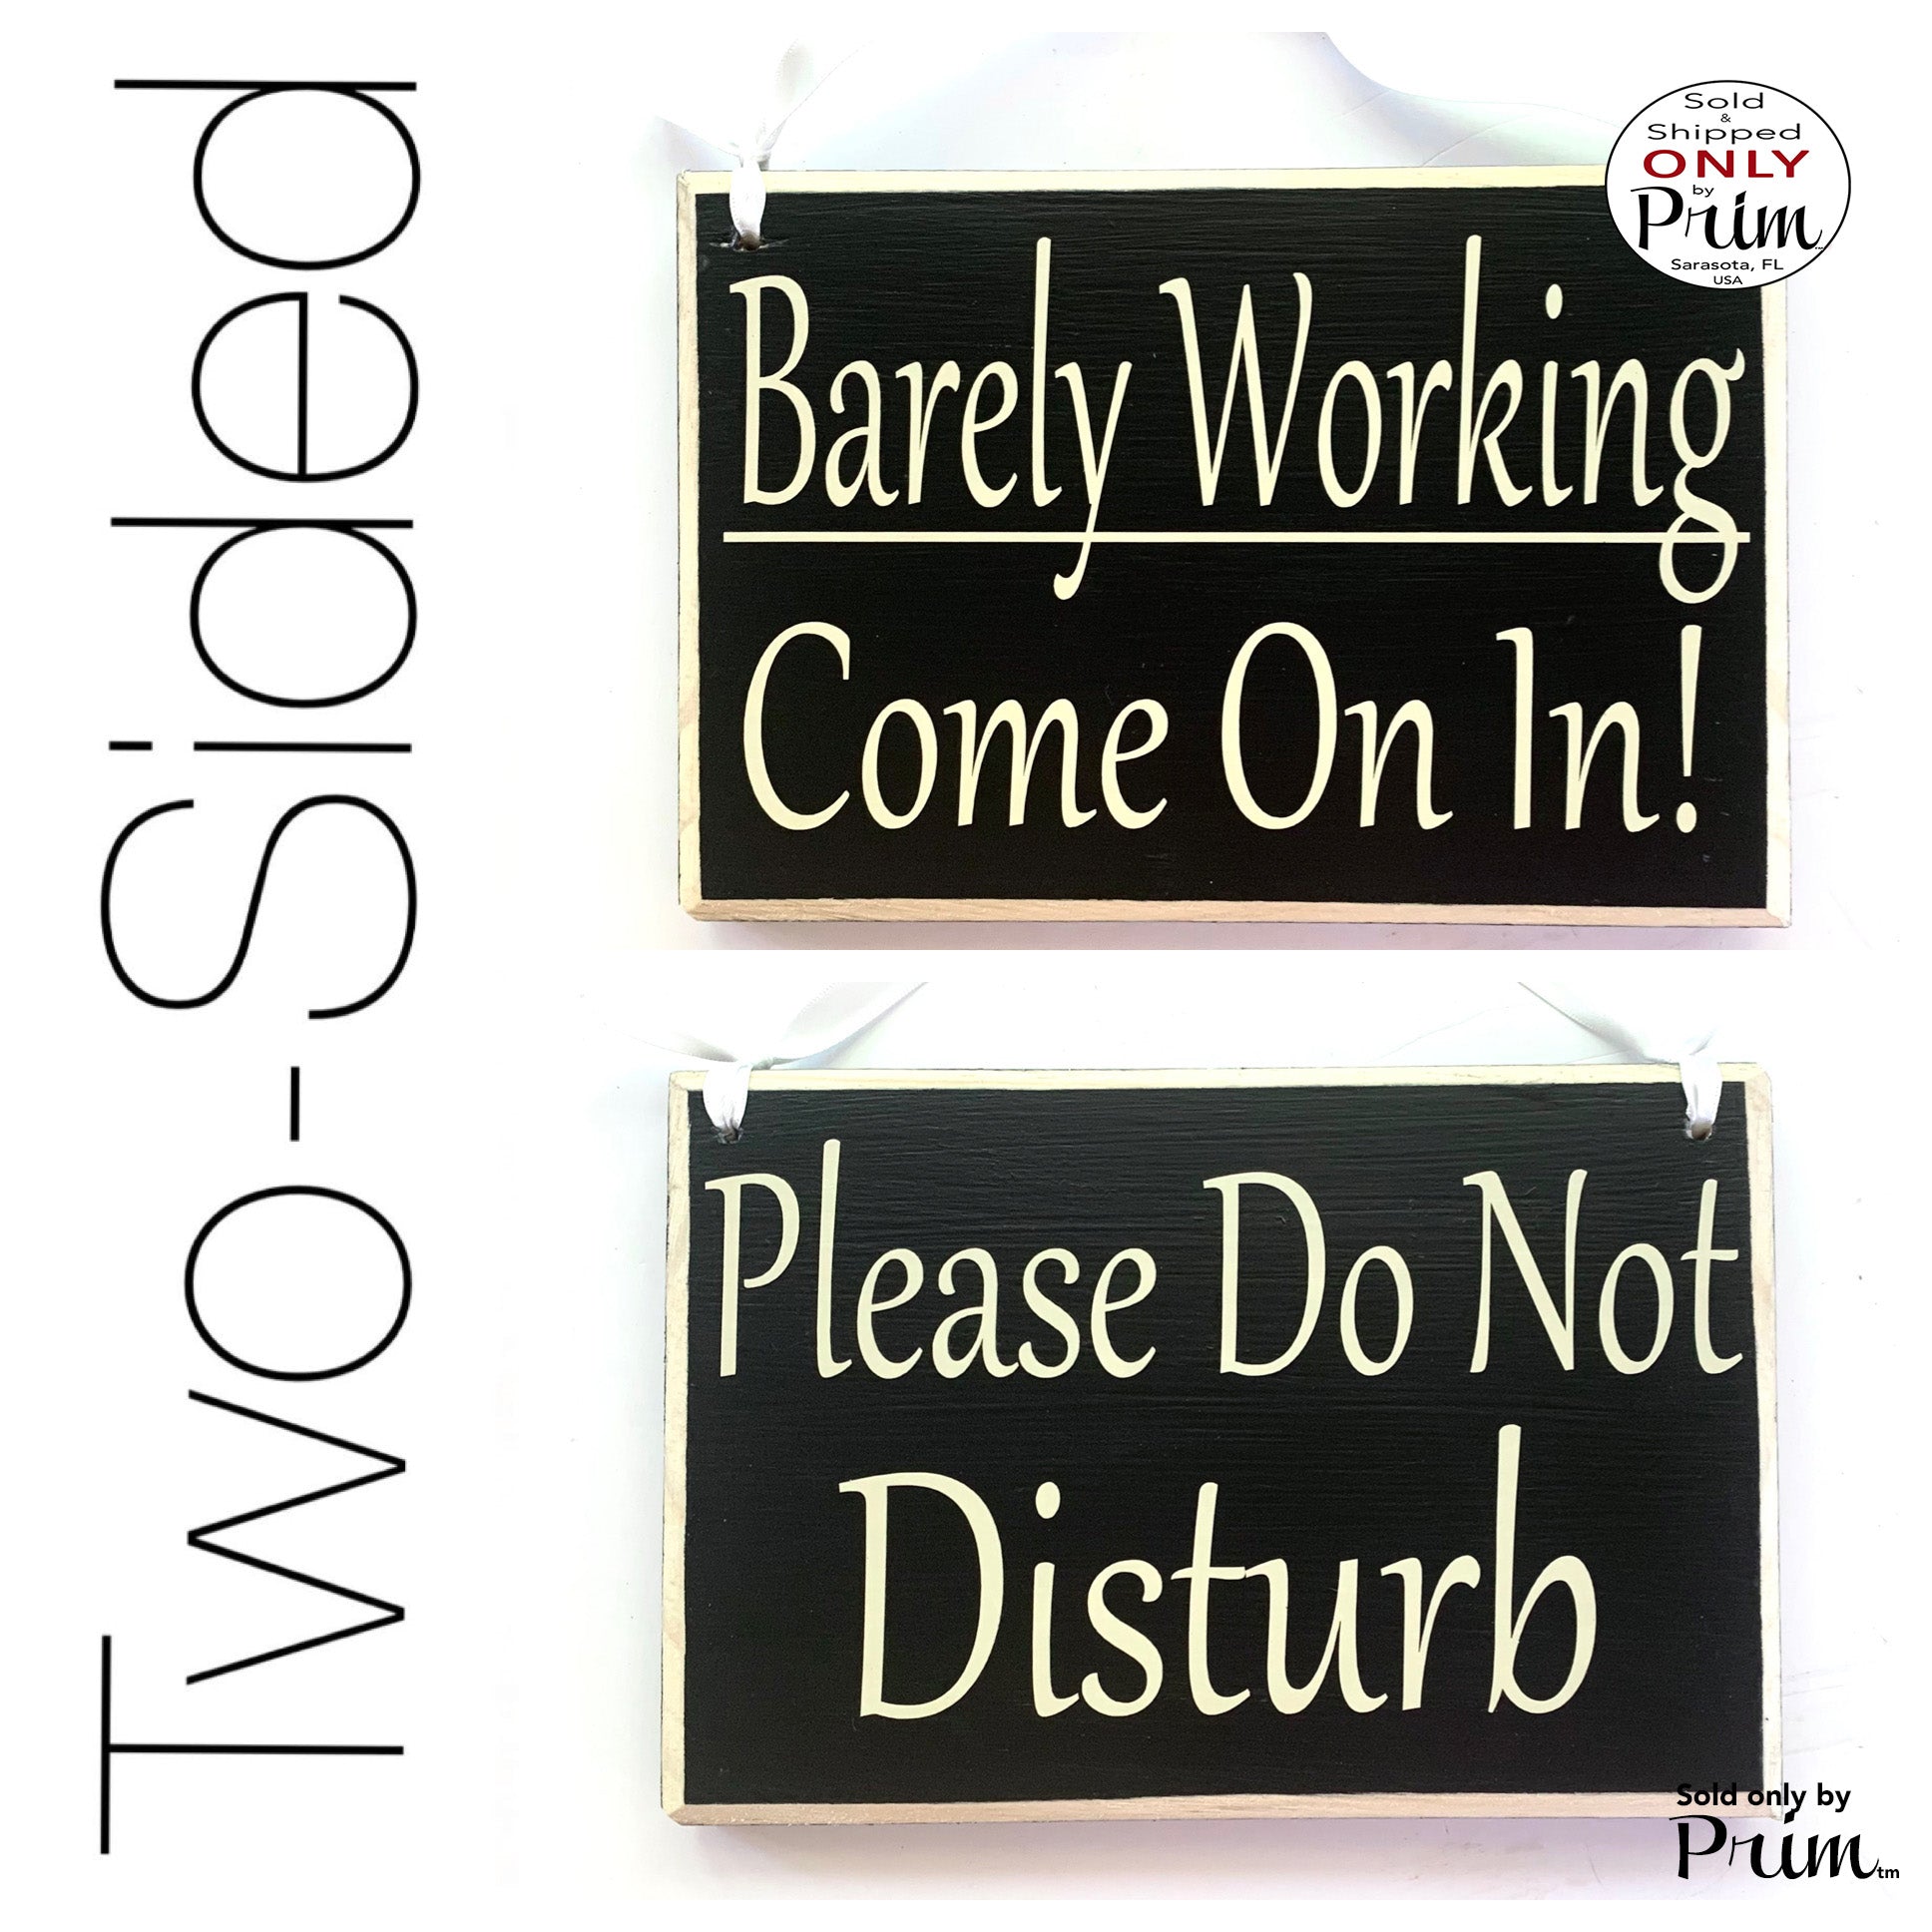 Designs by Prim 8x6 Barely Working Come On In Please Do Not Disturb Custom Wood Sign Hardly Knock Quiet Unavailable Sorry We Missed You Office Door Plaque